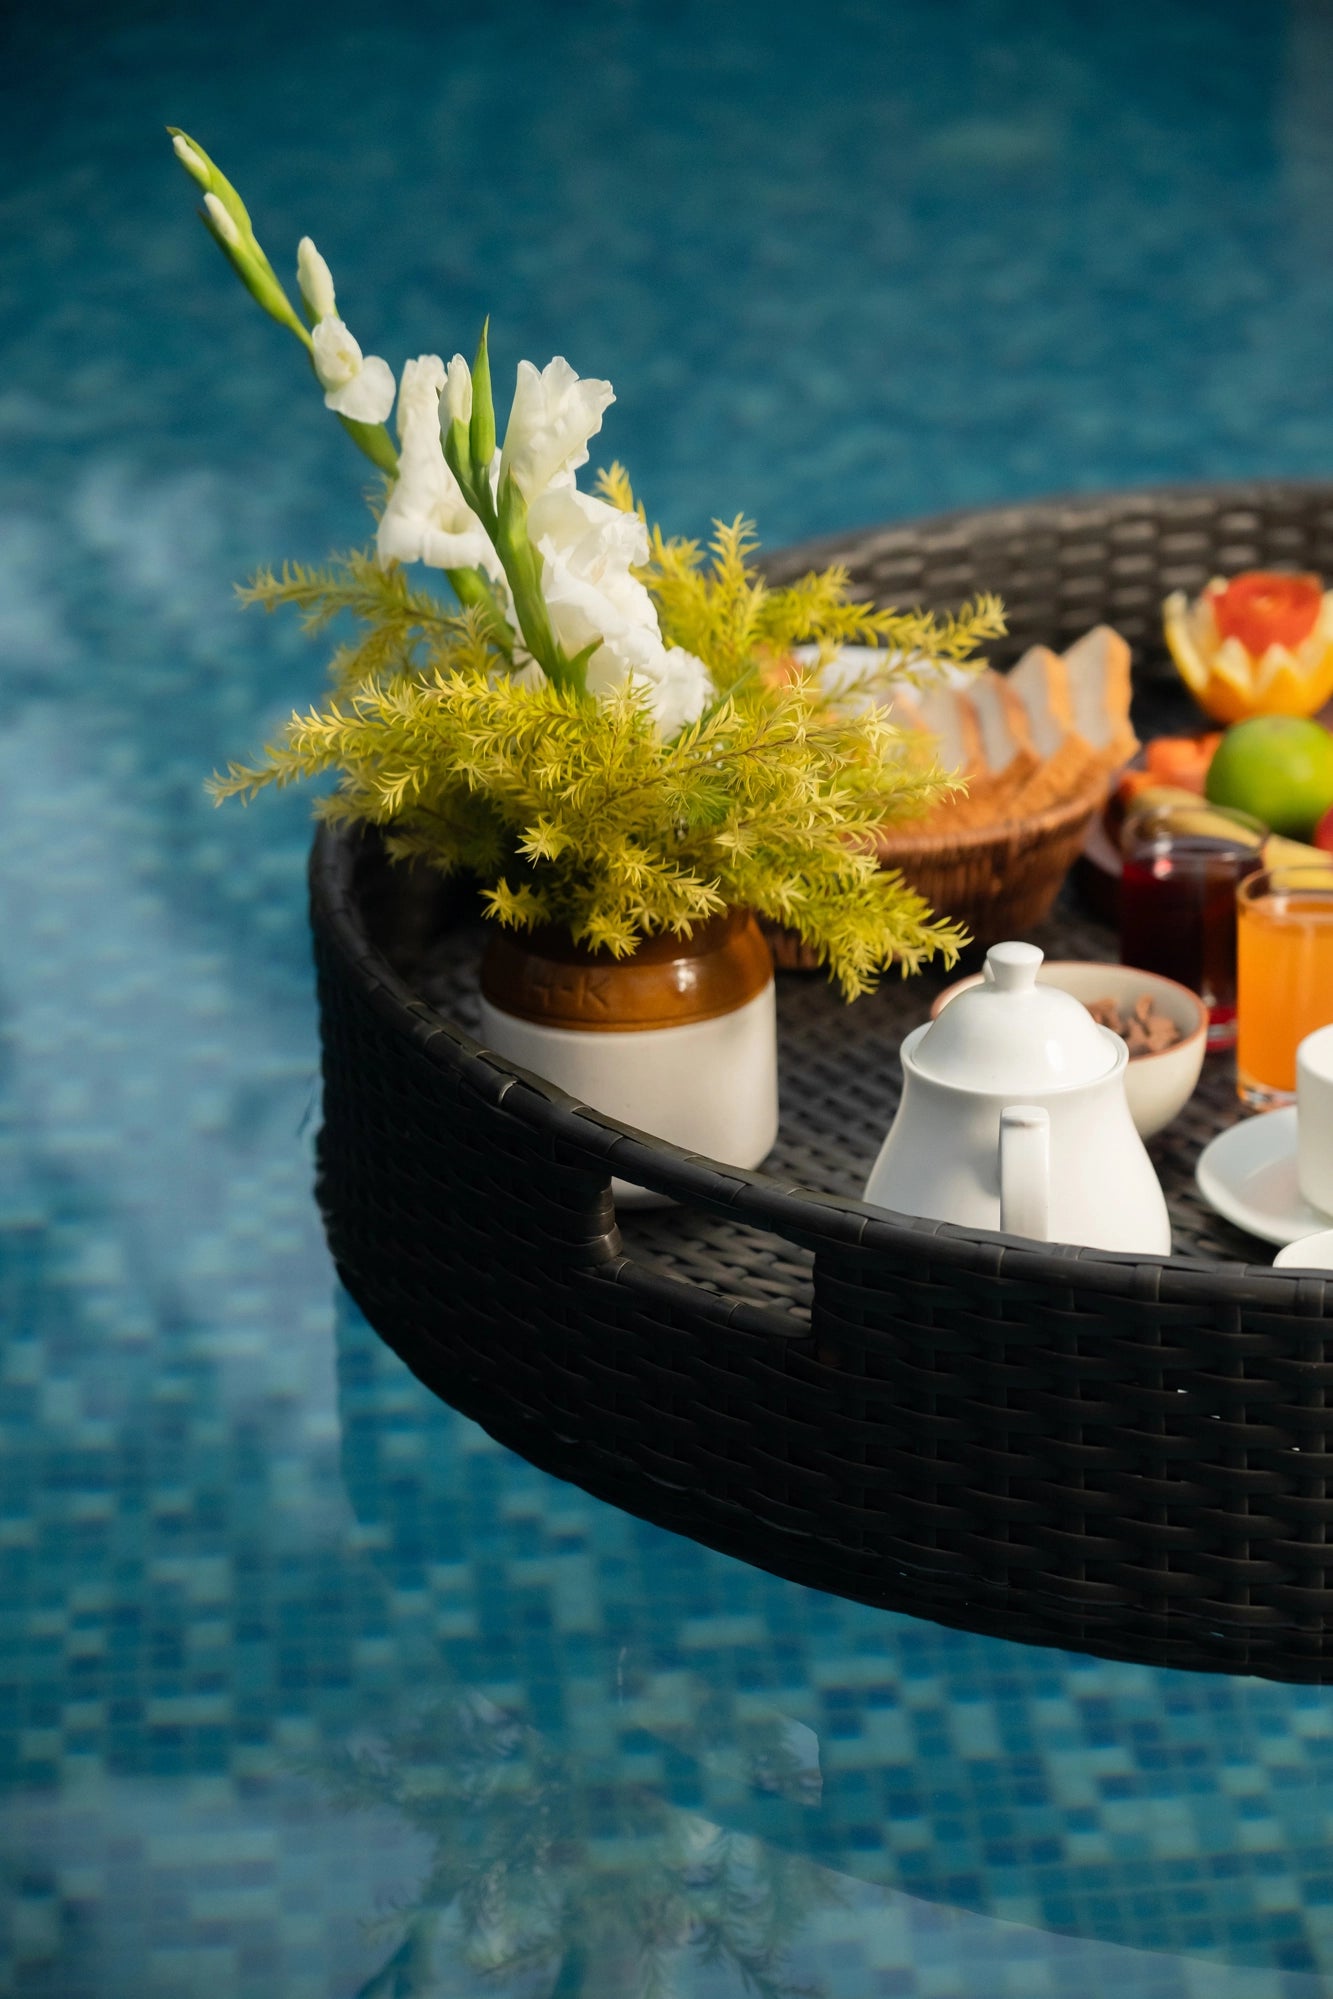 Floating trays Poolside luxury Pool party essentials Versatile pool floats Rattan style design Handcrafted in Bali Synthetic fibers Environmentally friendly Non-toxic materials Multiple uses Hot tub accessory Summer pool party Portable serving tray Resort amenities Unique guest experiences Luxury pool accessories Innovative hotel amenity tesu